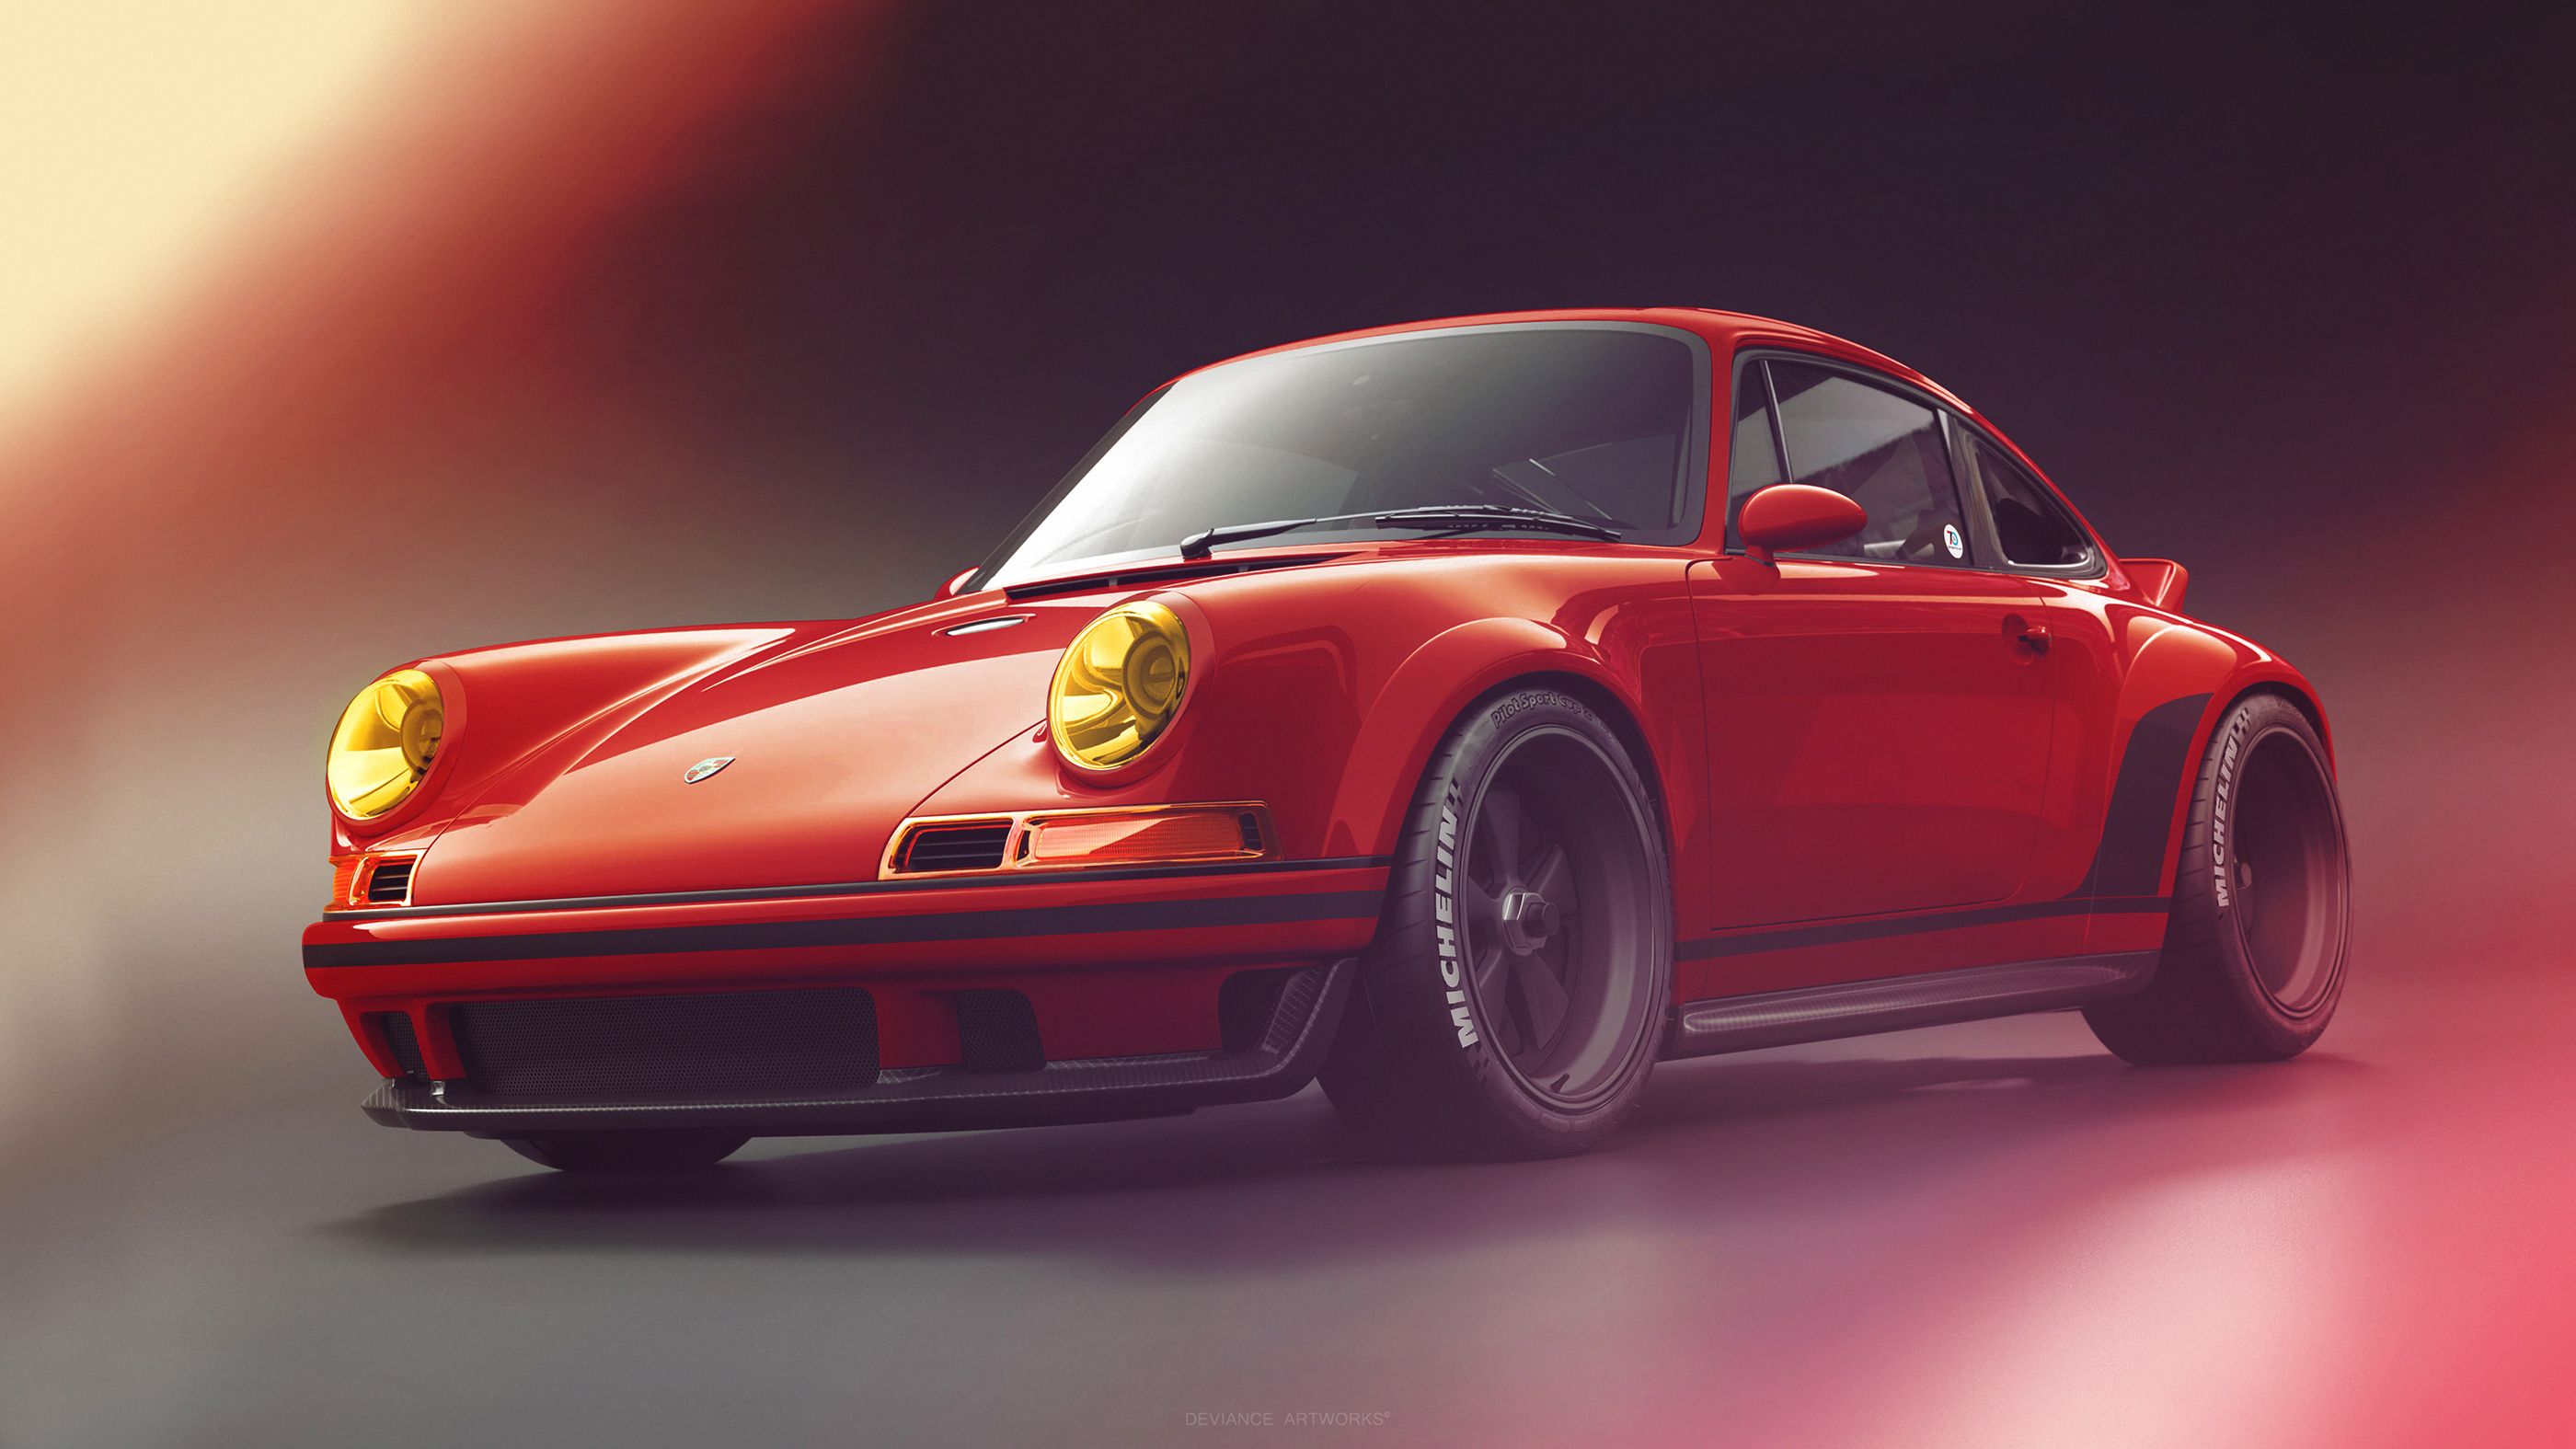 Red Porsche 1440P Resolution HD 4k Wallpaper, Image, Background, Photo and Picture